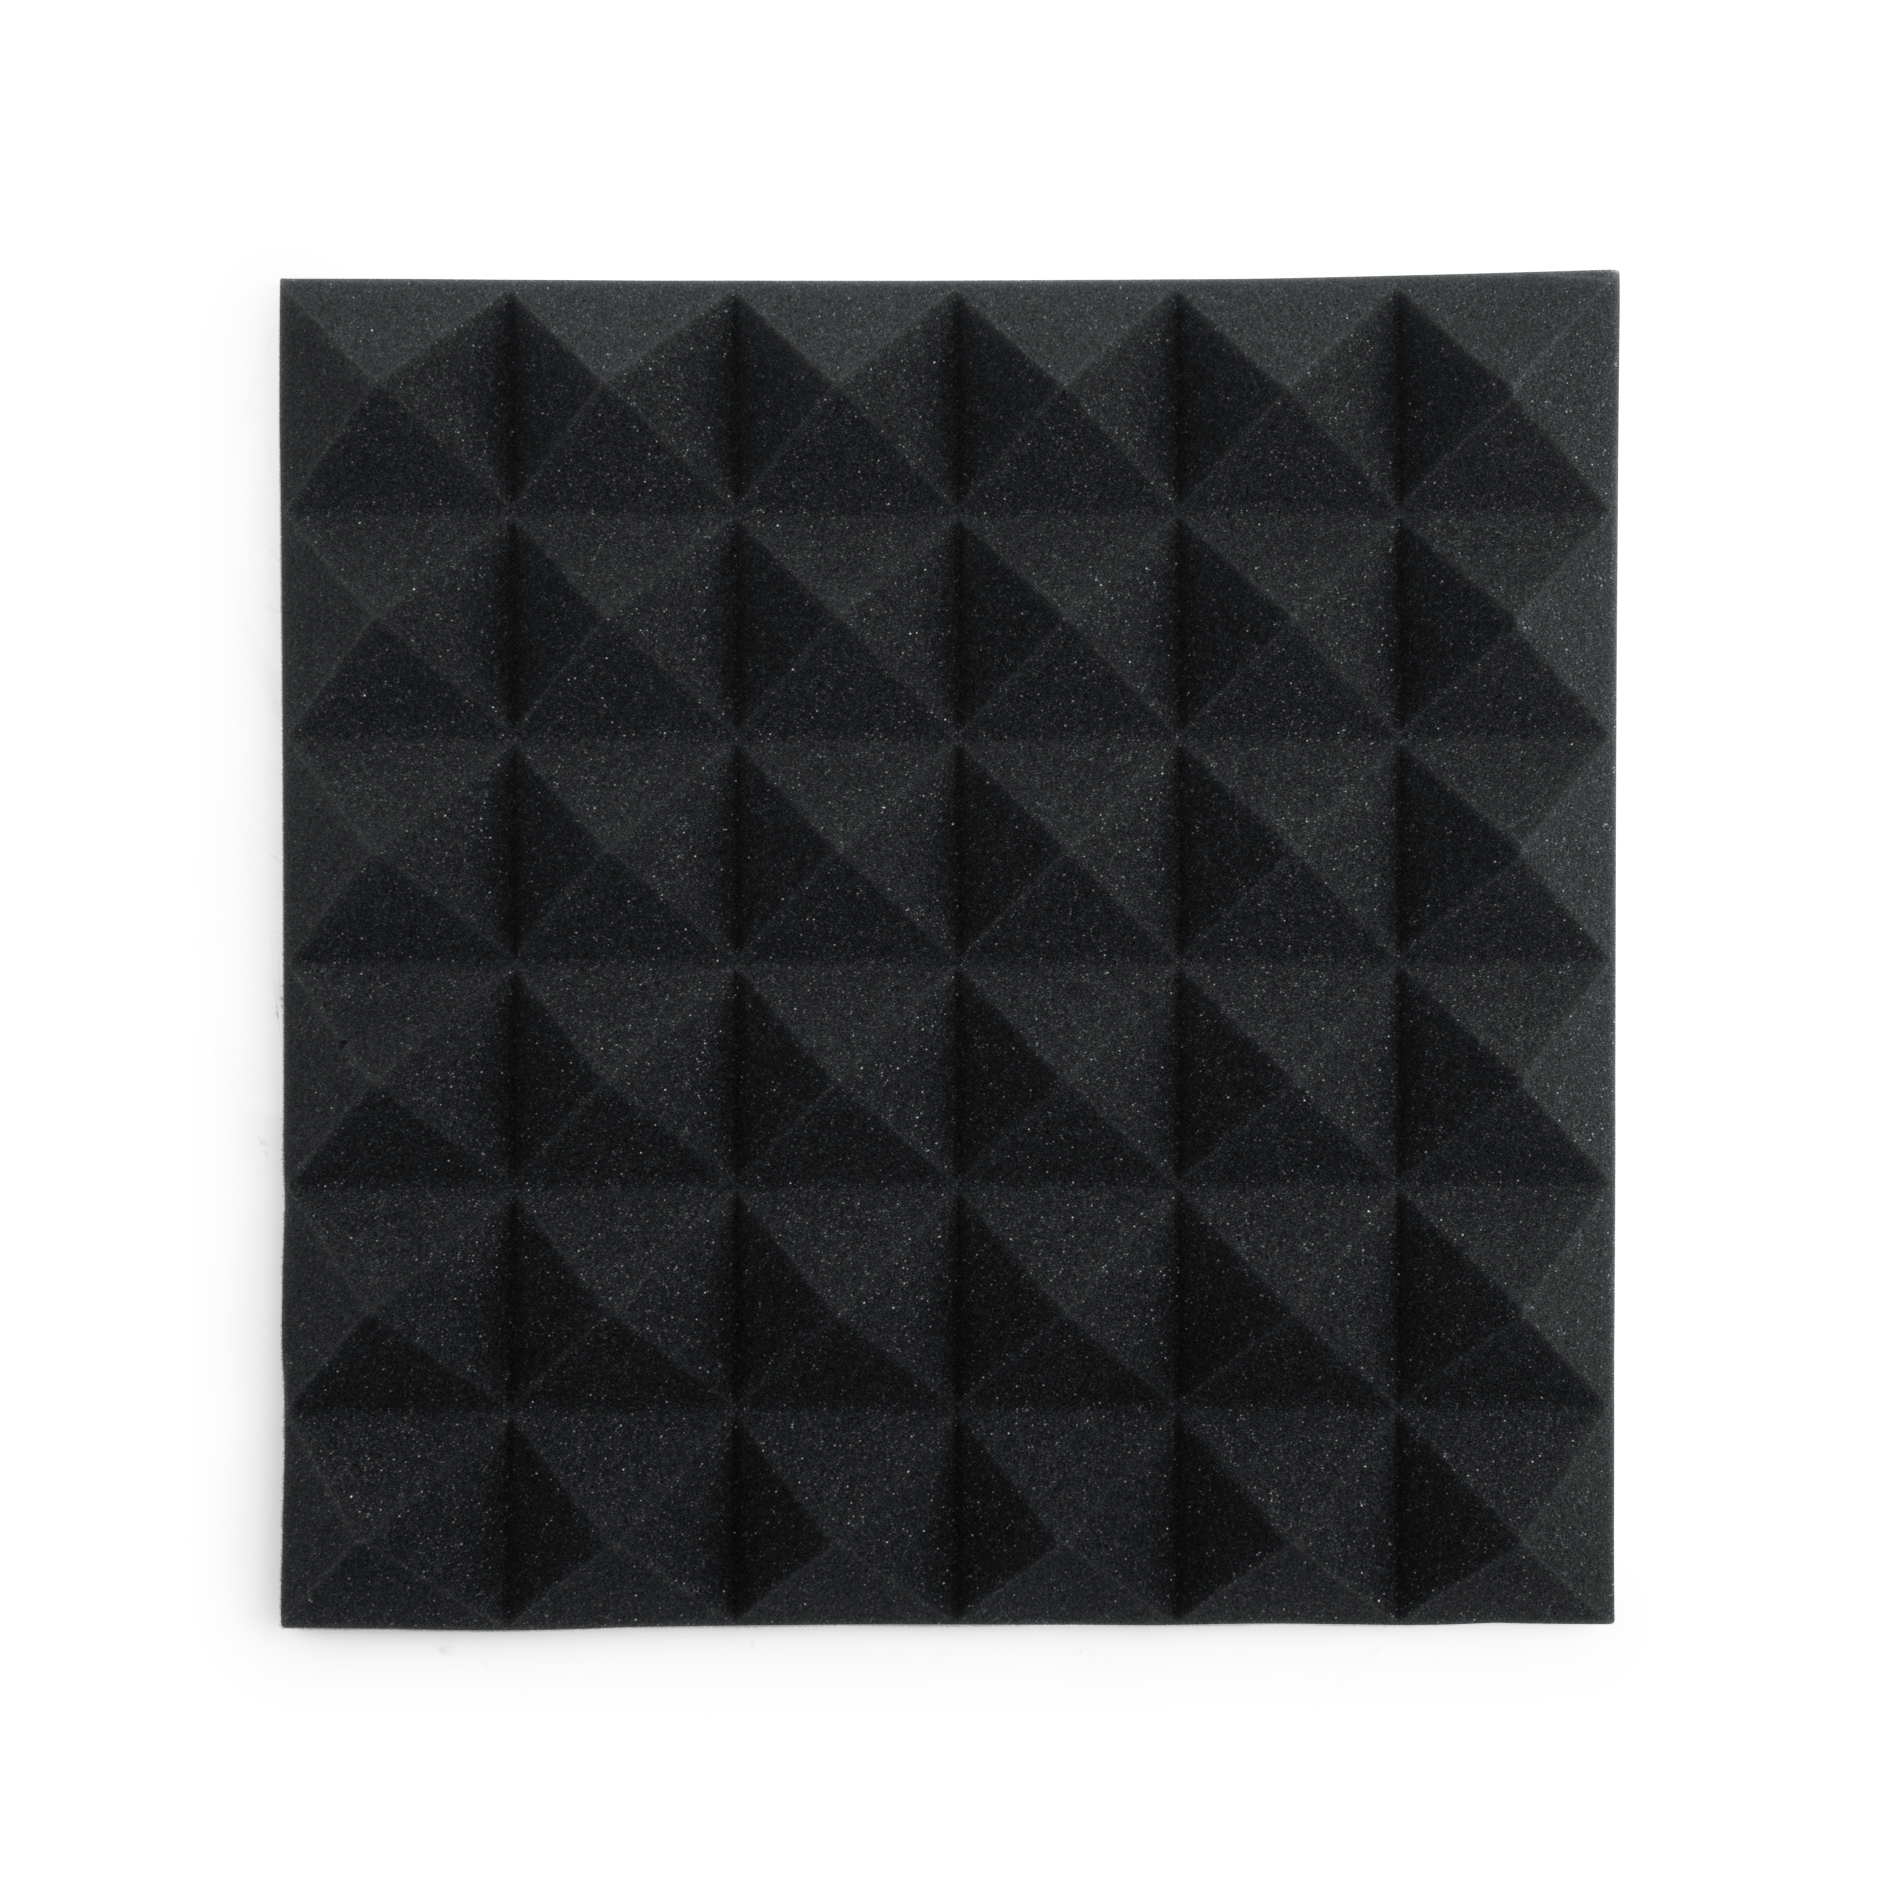 Udderly Quiet™ Pyramid Acoustic Foam 3 Charcoal (Case of 12)